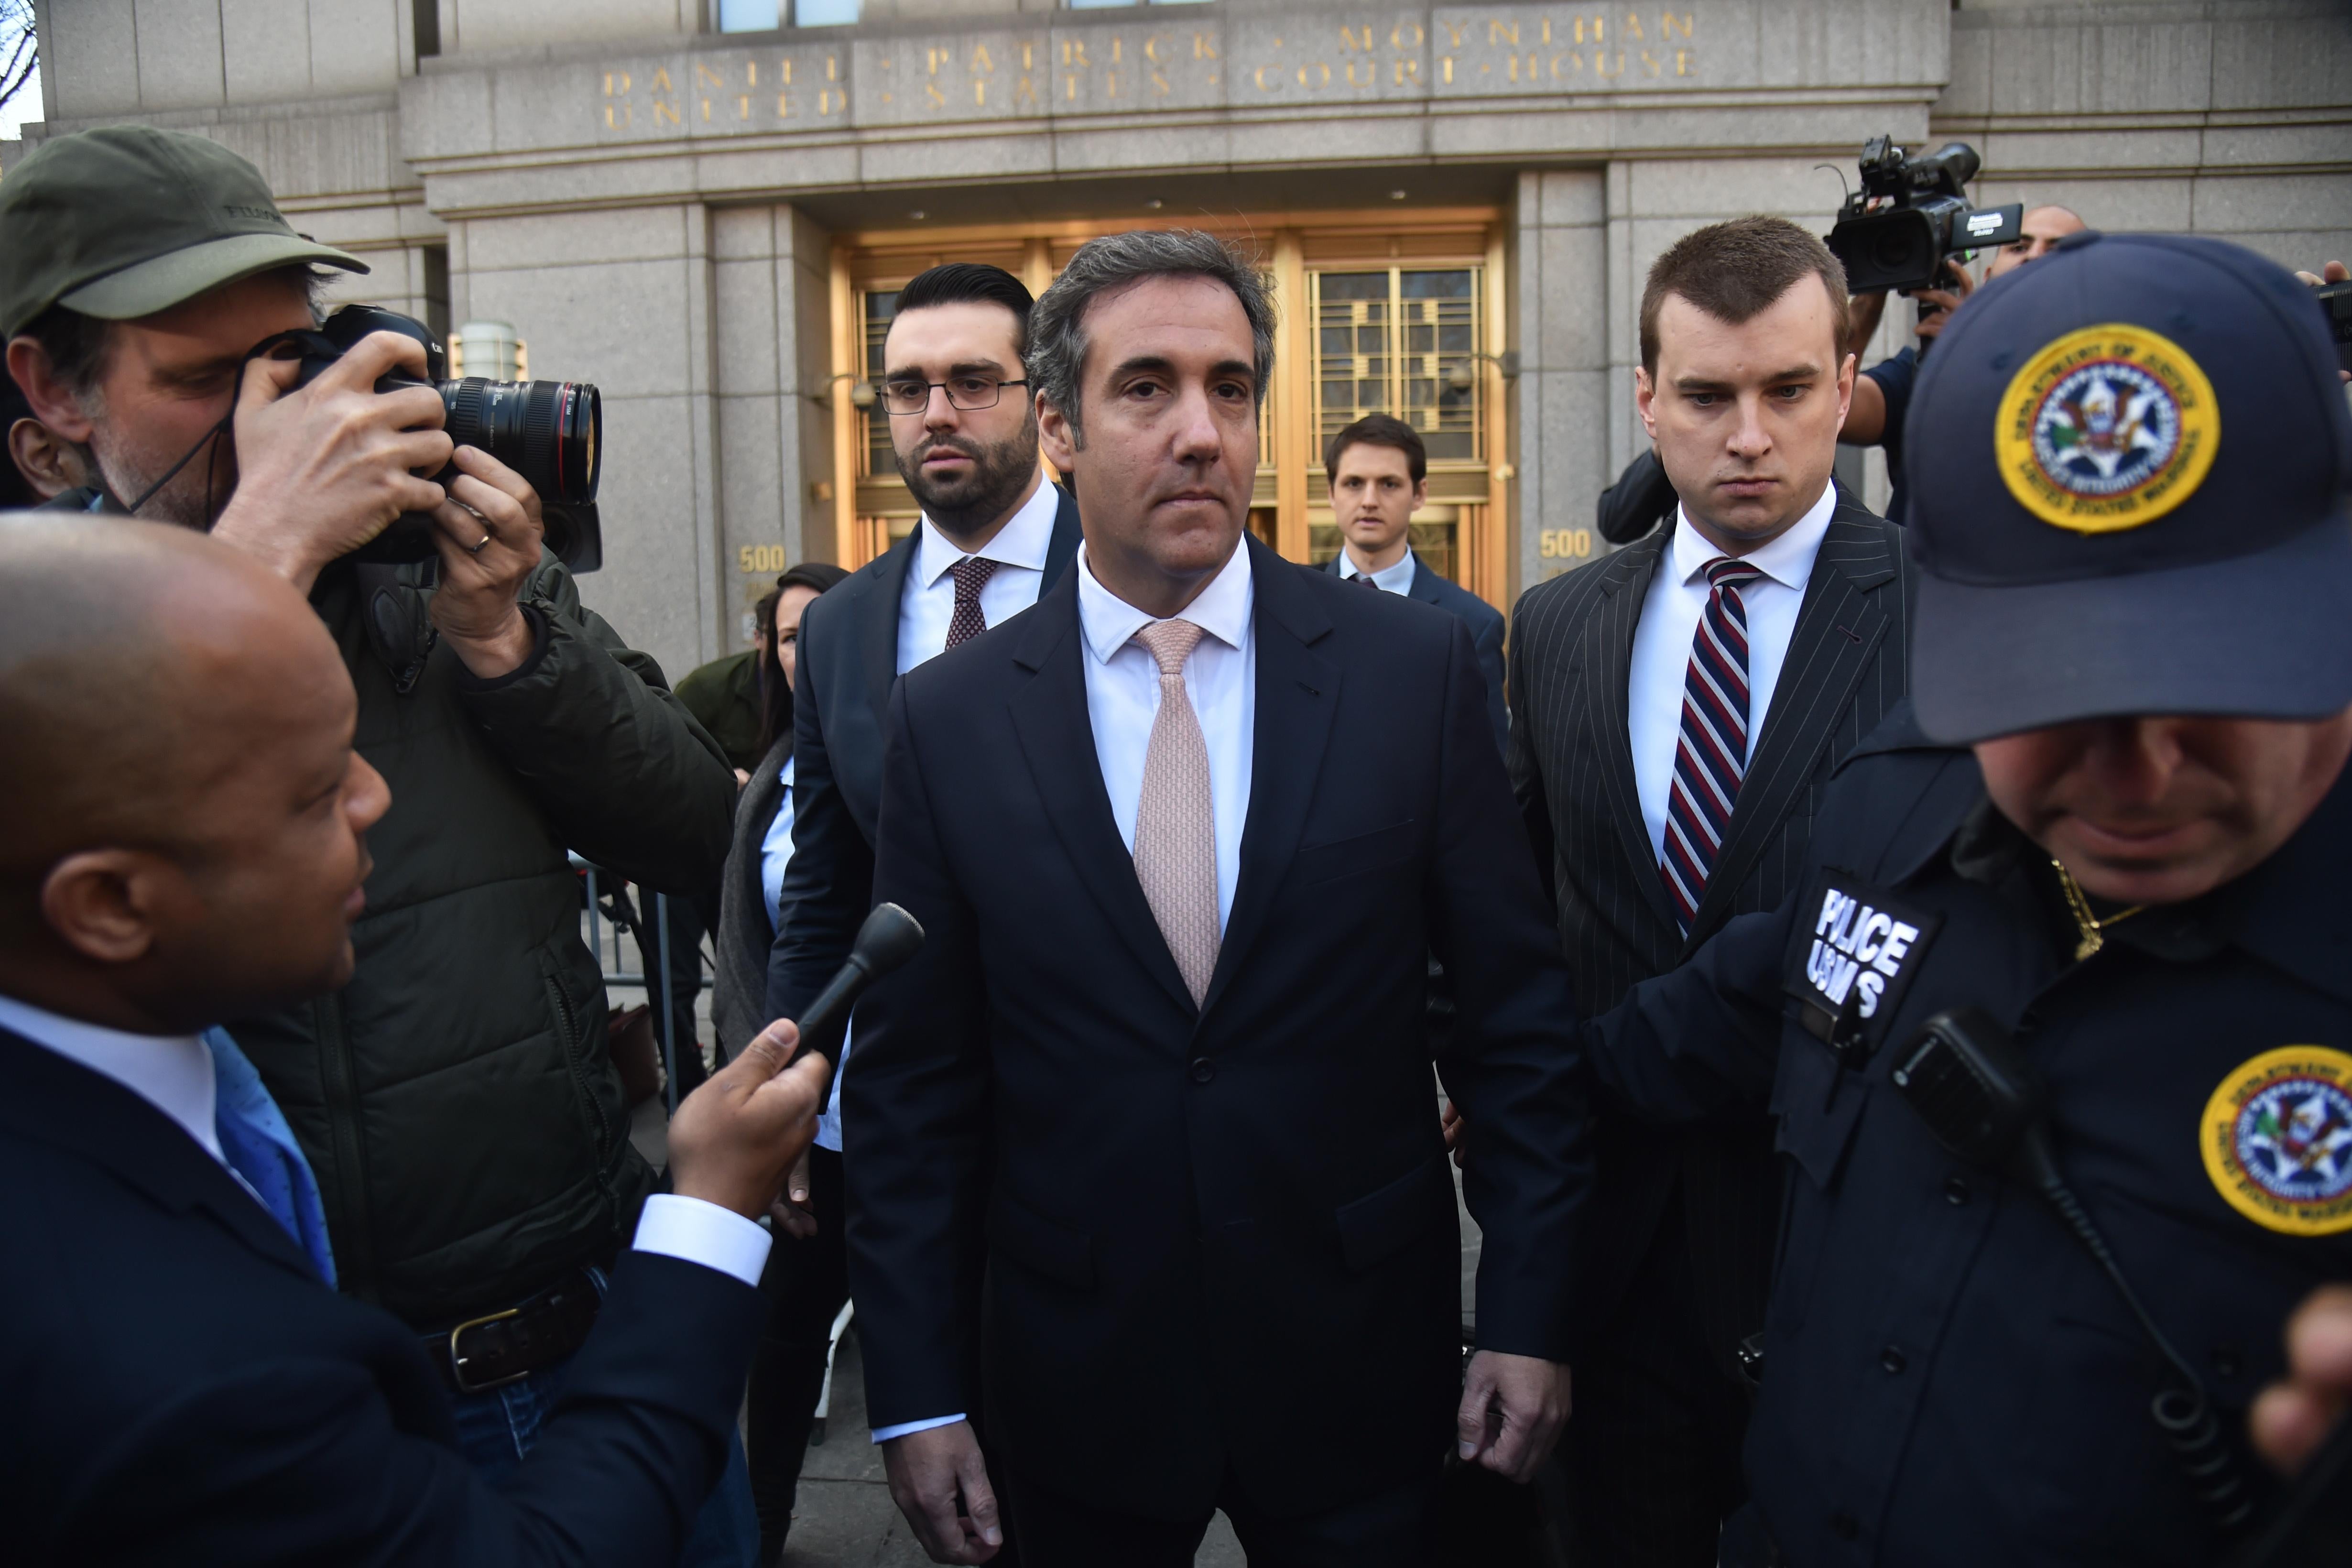 US President Donald Trump's personal lawyer Michael Cohen(C) leaves the US Courthouse in New York on April 26, 2018. - US President Donald Trump acknowledged on Thursday that his personal lawyer, Michael Cohen, represented him in a 'deal' involving porn star Stormy Daniels. Trump had previously denied knowledge of a $130,000 payment Cohen made to Daniels that she claims was to prevent her from talking about their alleged 2006 affair.Trump, in a wide-ranging telephone interview with 'Fox and Friends,' admitted for the first time that Cohen represented him in a 'deal' with Daniels, who has filed a lawsuit seeking to have the 'hush agreement' negotiated by Cohen thrown out. (Photo by HECTOR RETAMAL / AFP)        (Photo credit should read HECTOR RETAMAL/AFP/Getty Images)